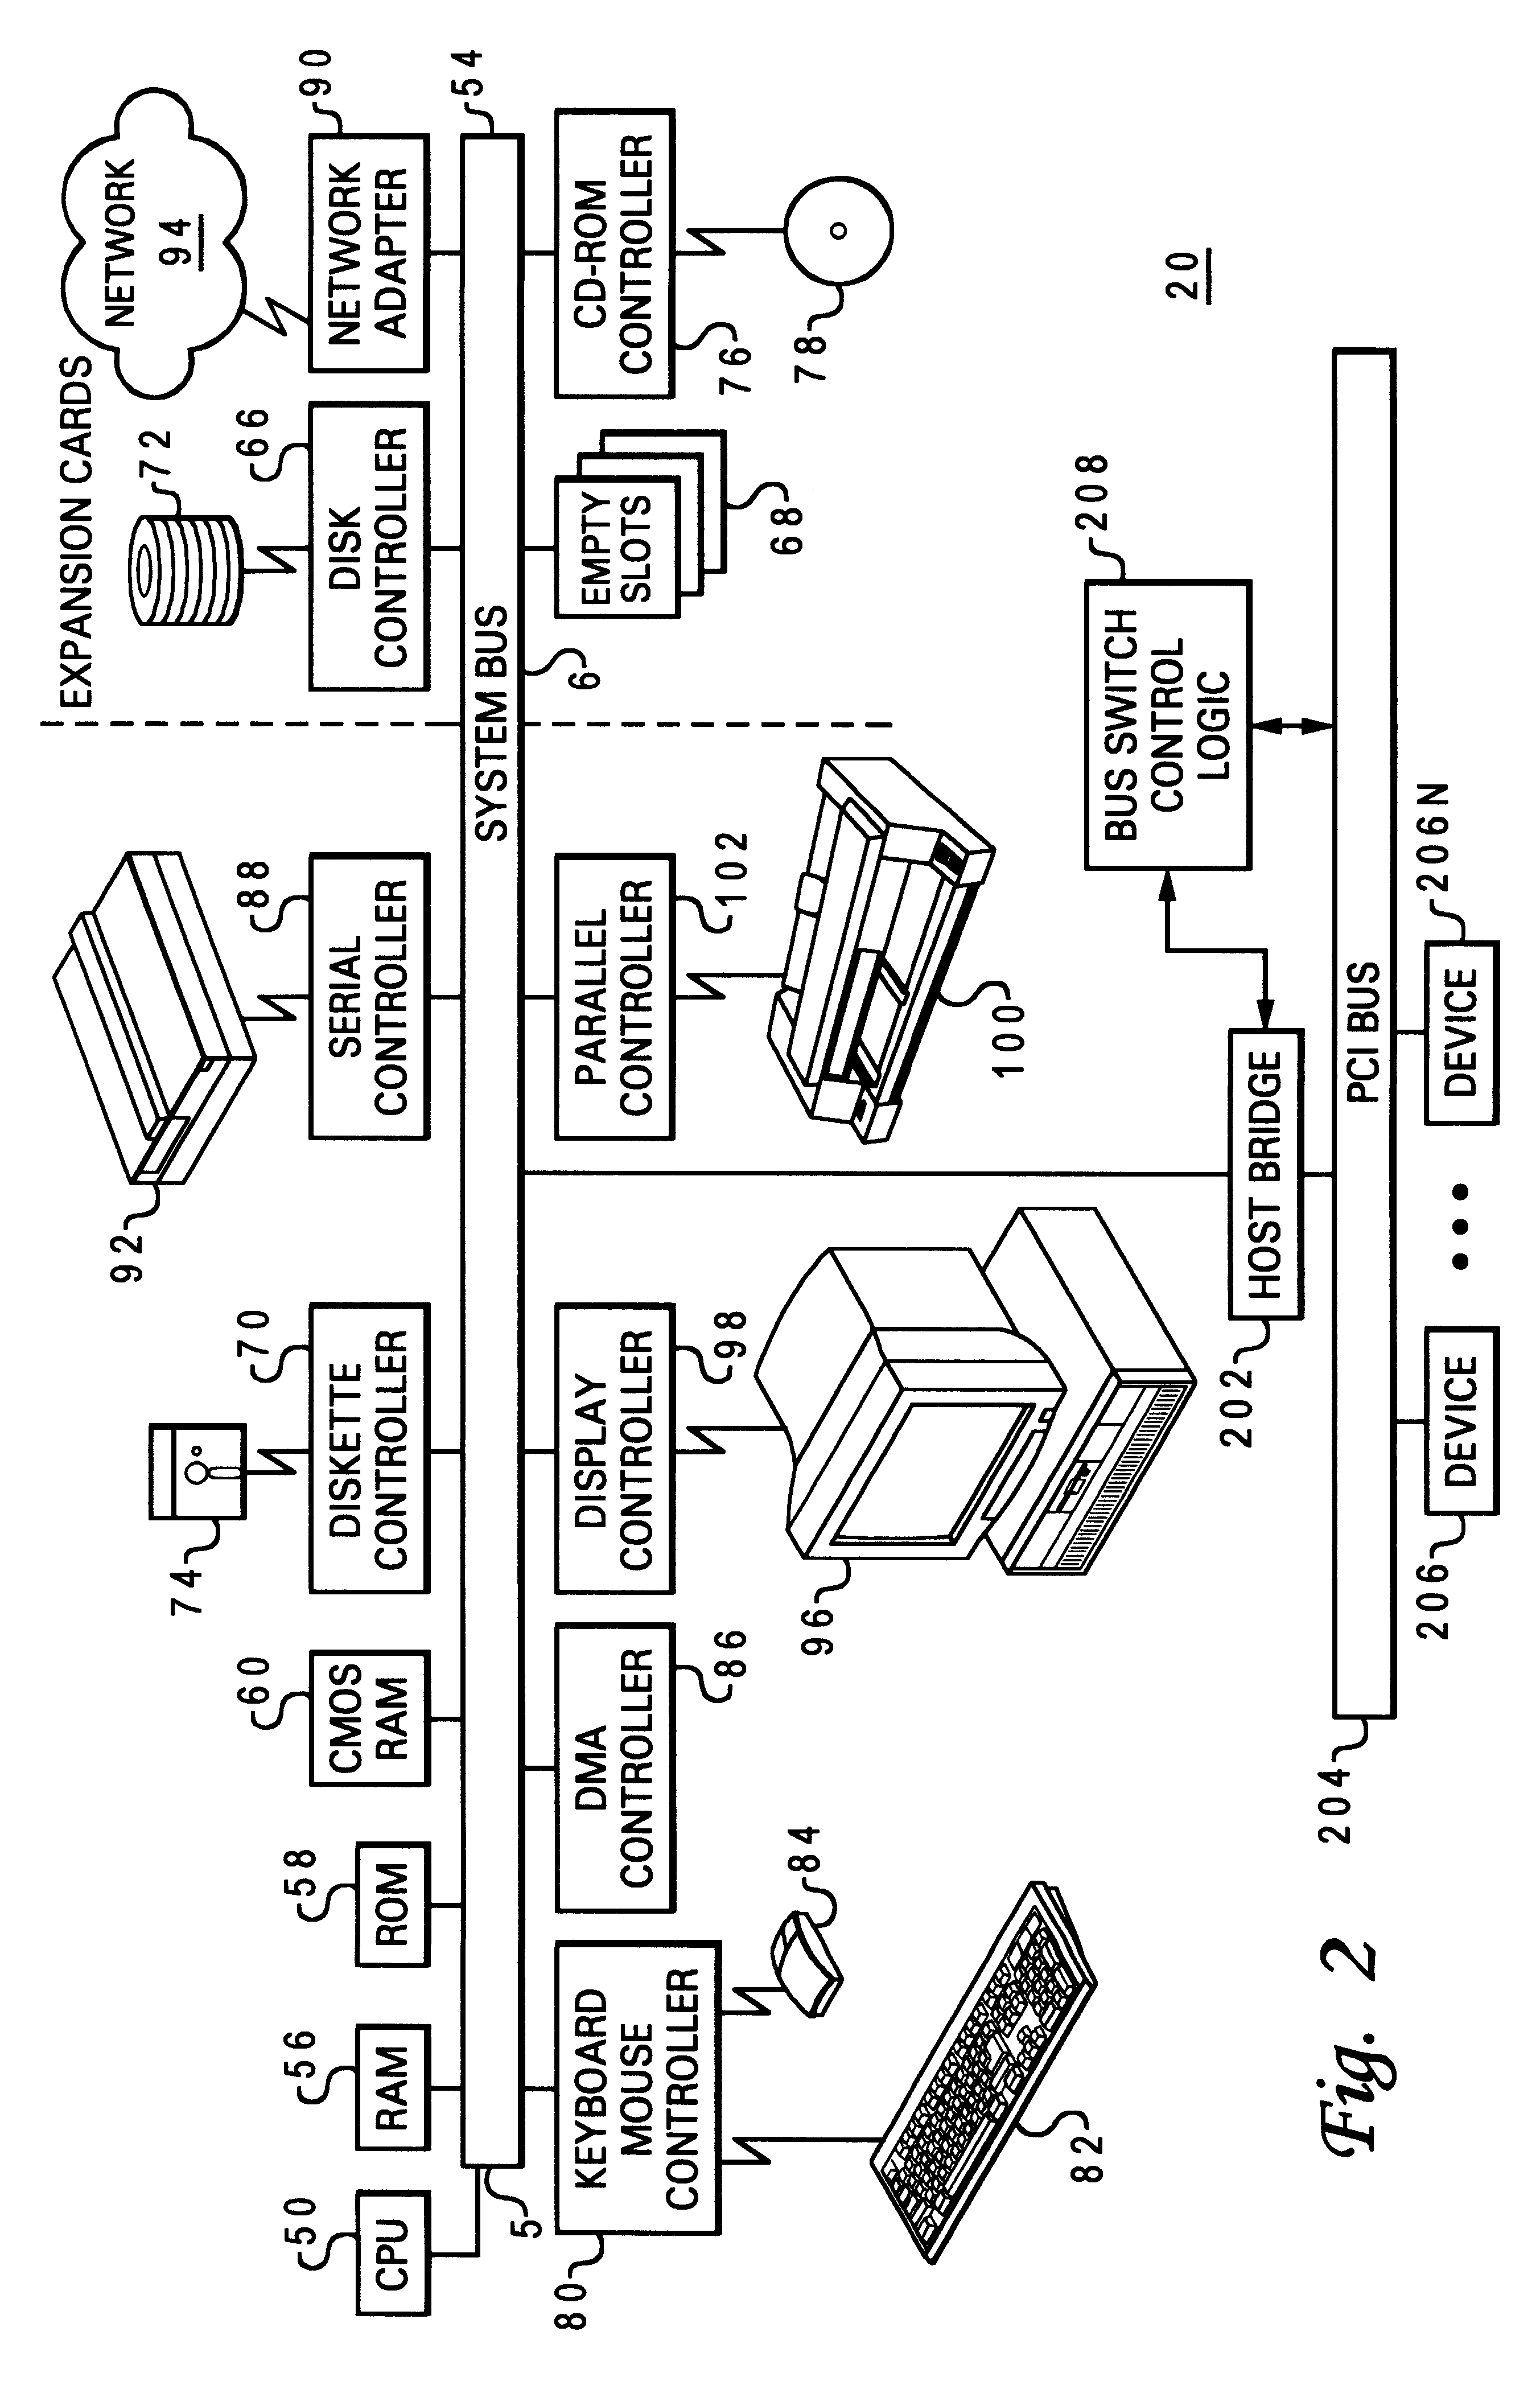 Method and system for PCI slot expansion via electrical isolation